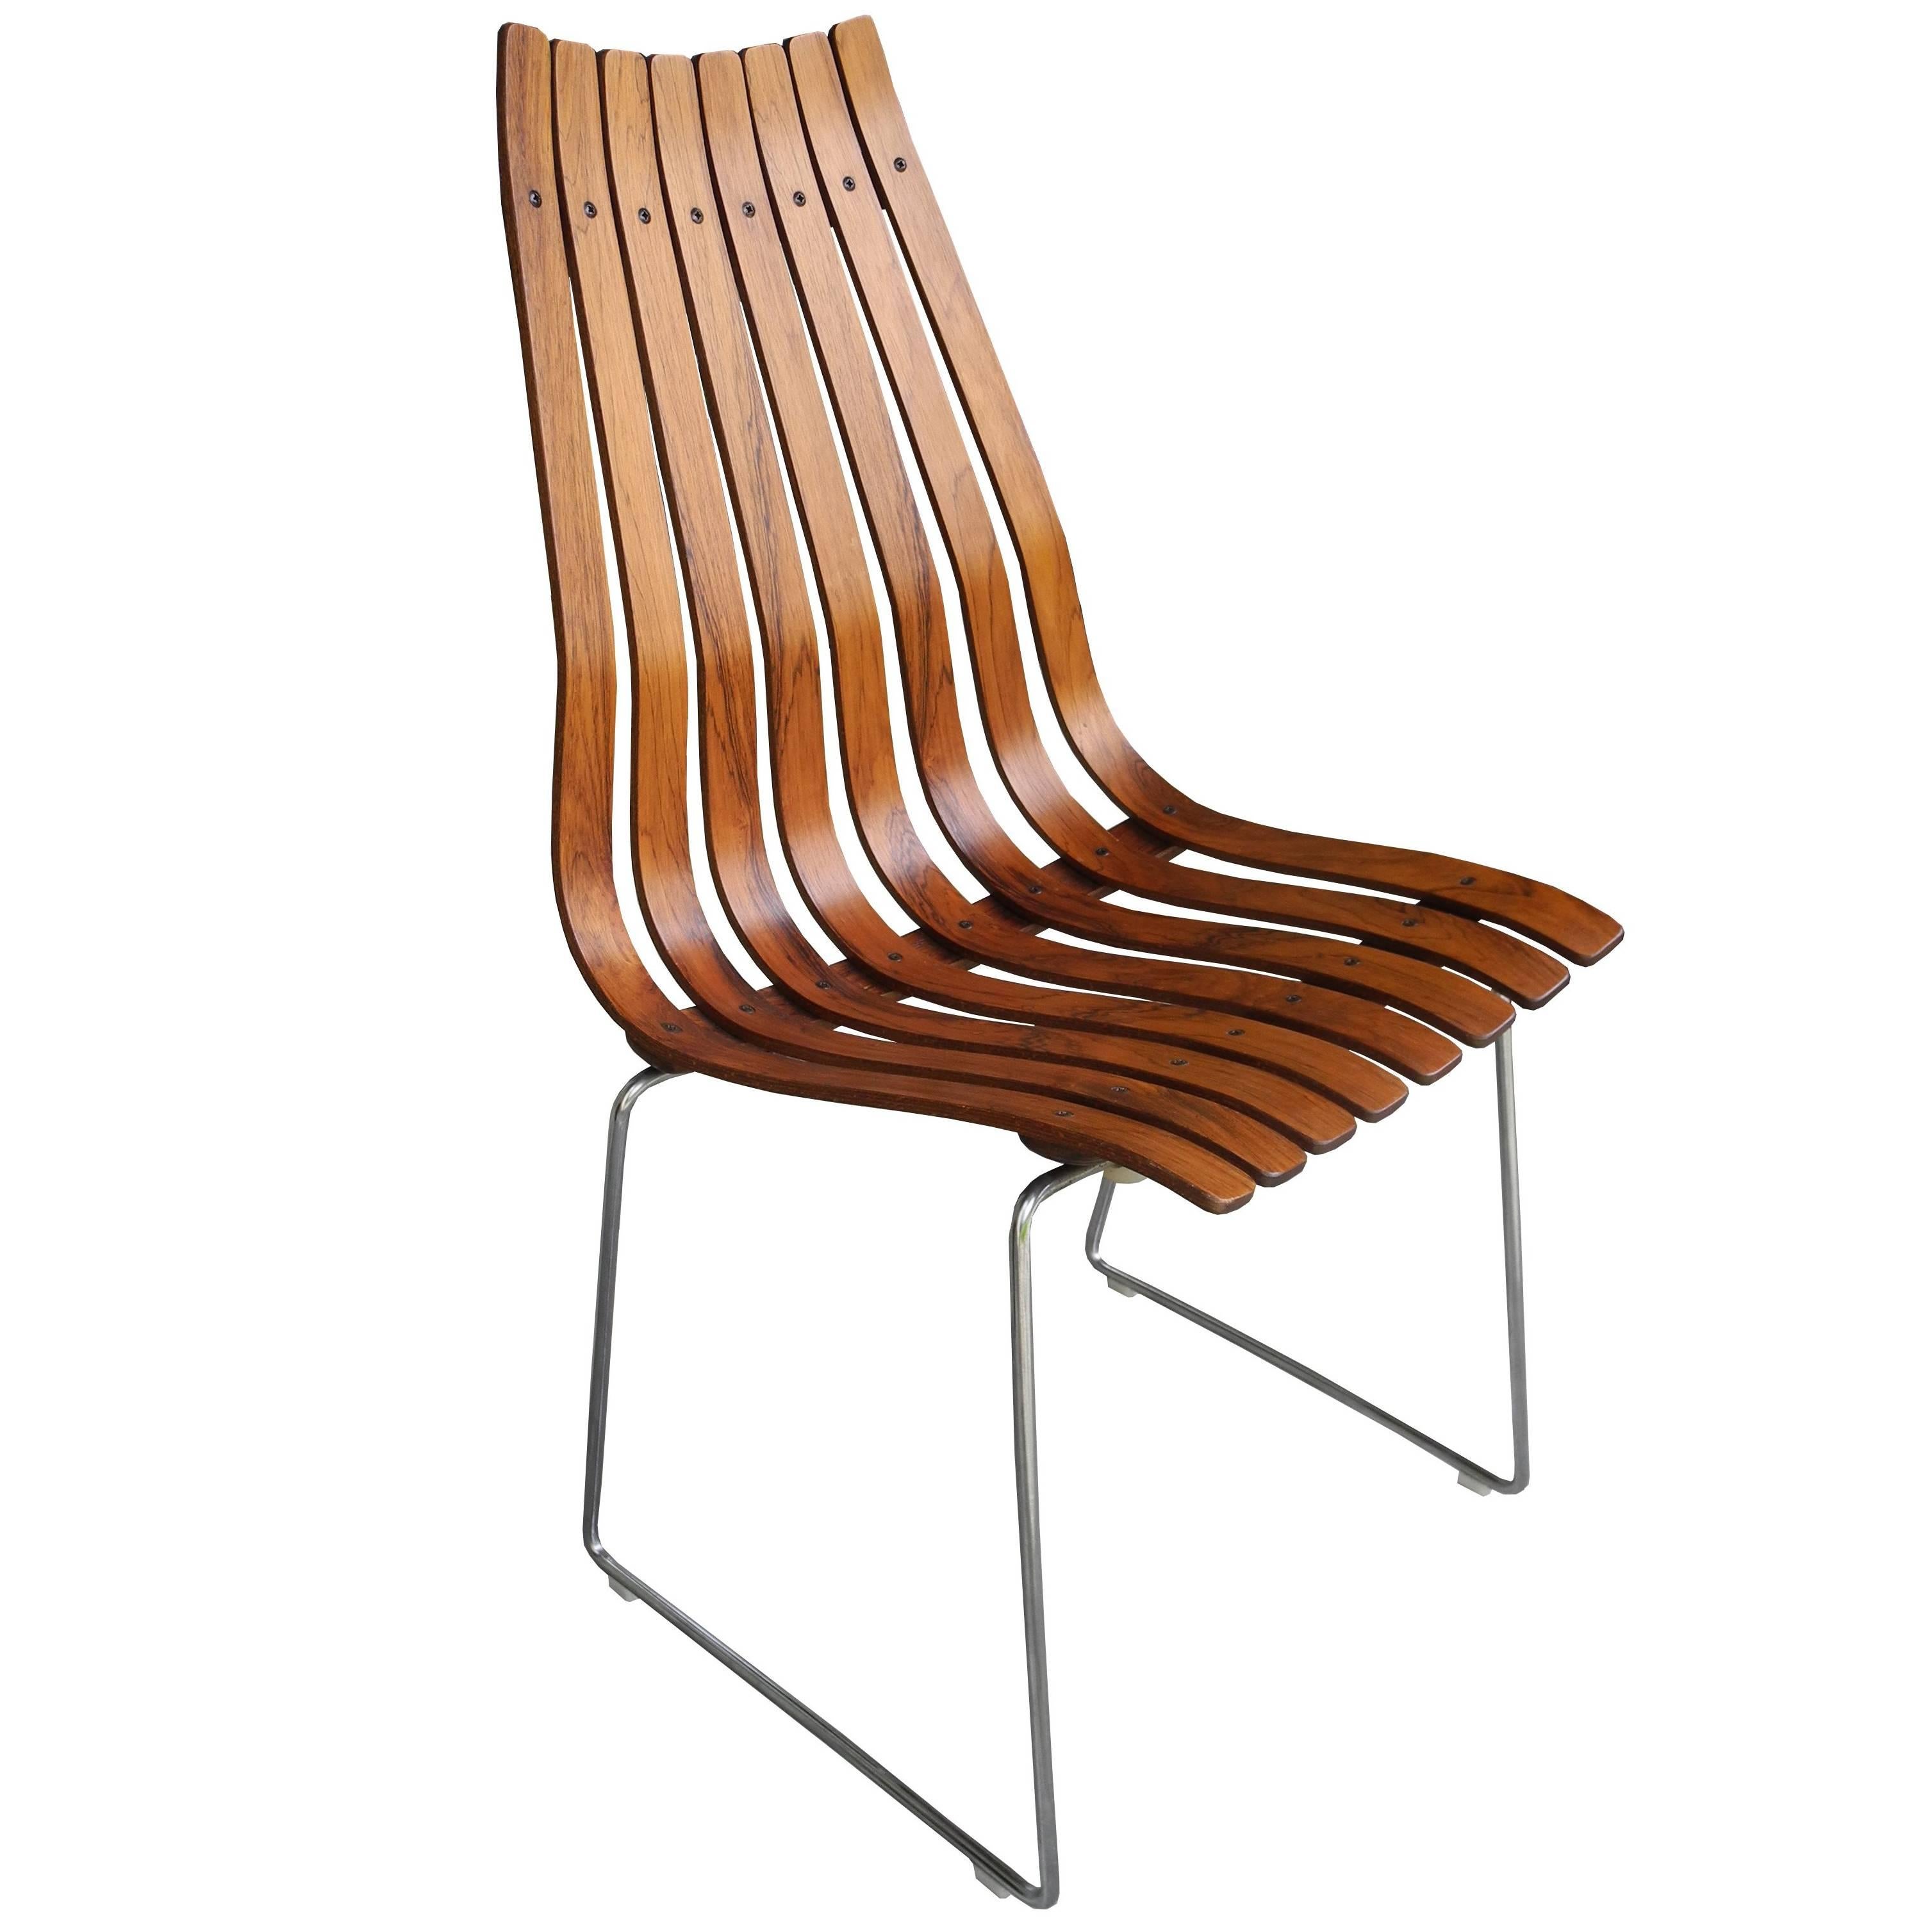 Single Rosewood Slatted Norwegian Chair by Hans Brattrud for Hove Mobler For Sale